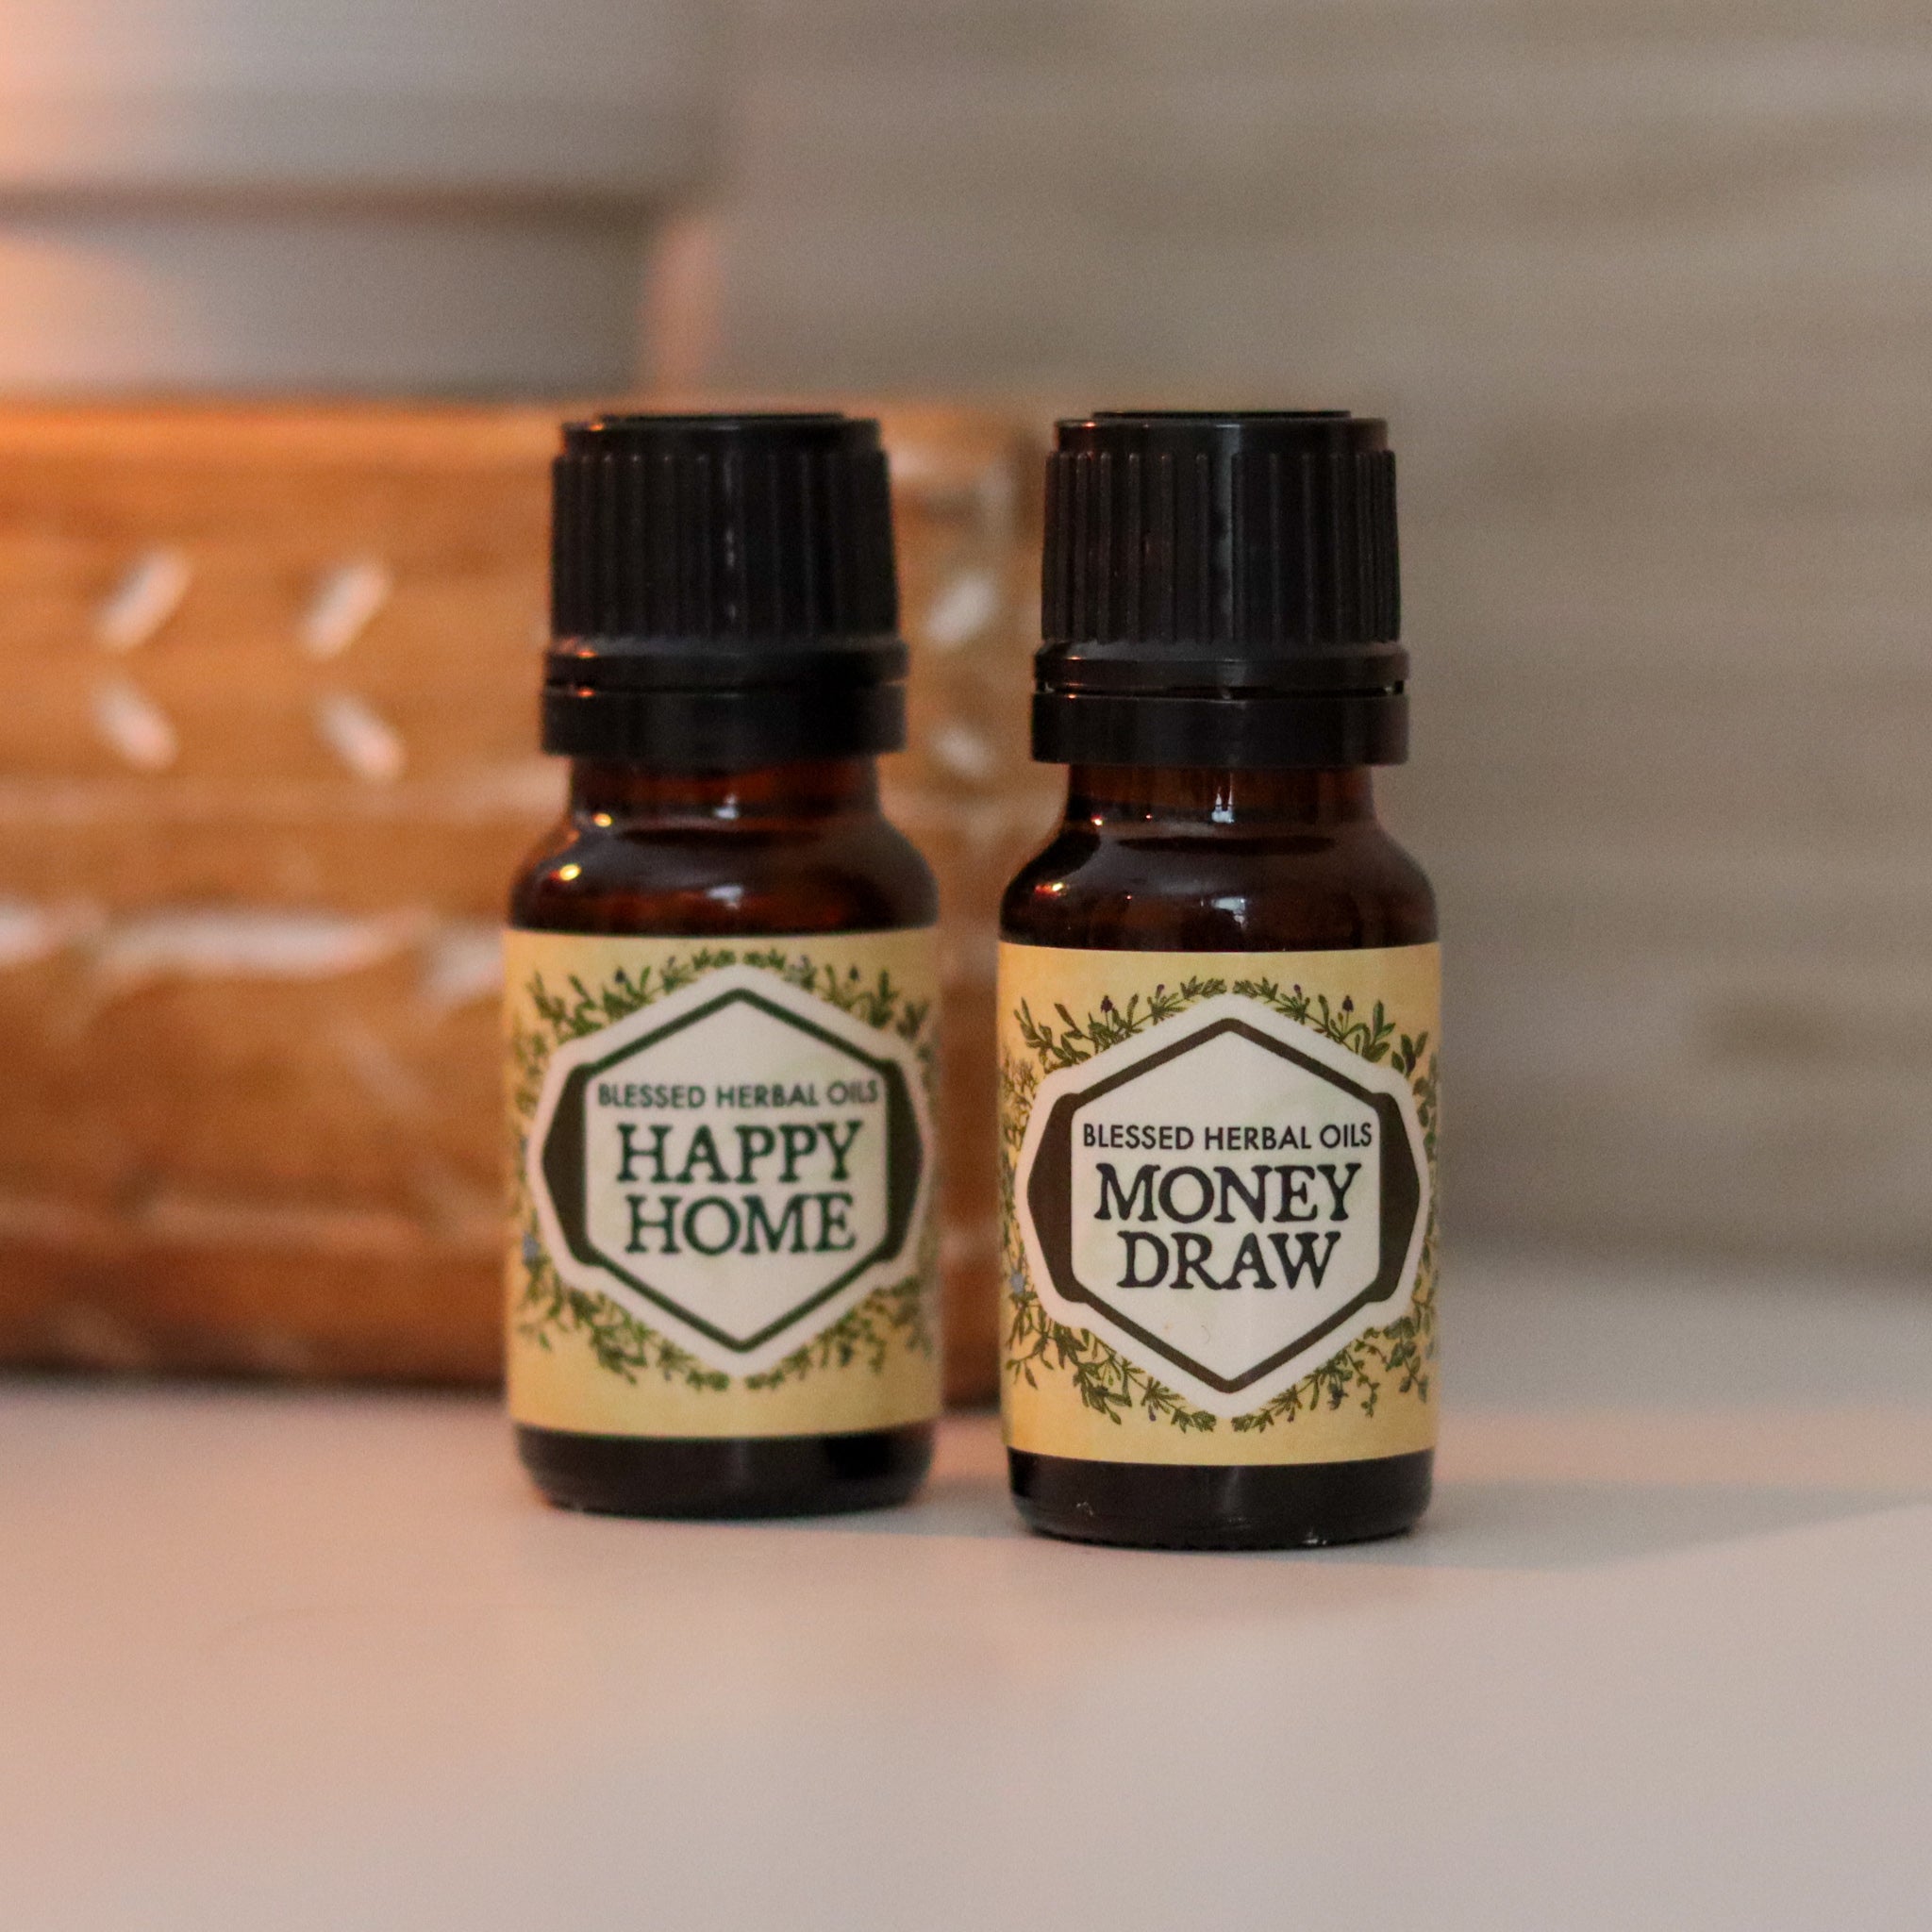 Blessed Herbal Happy Home and Money Draw oils bottles 